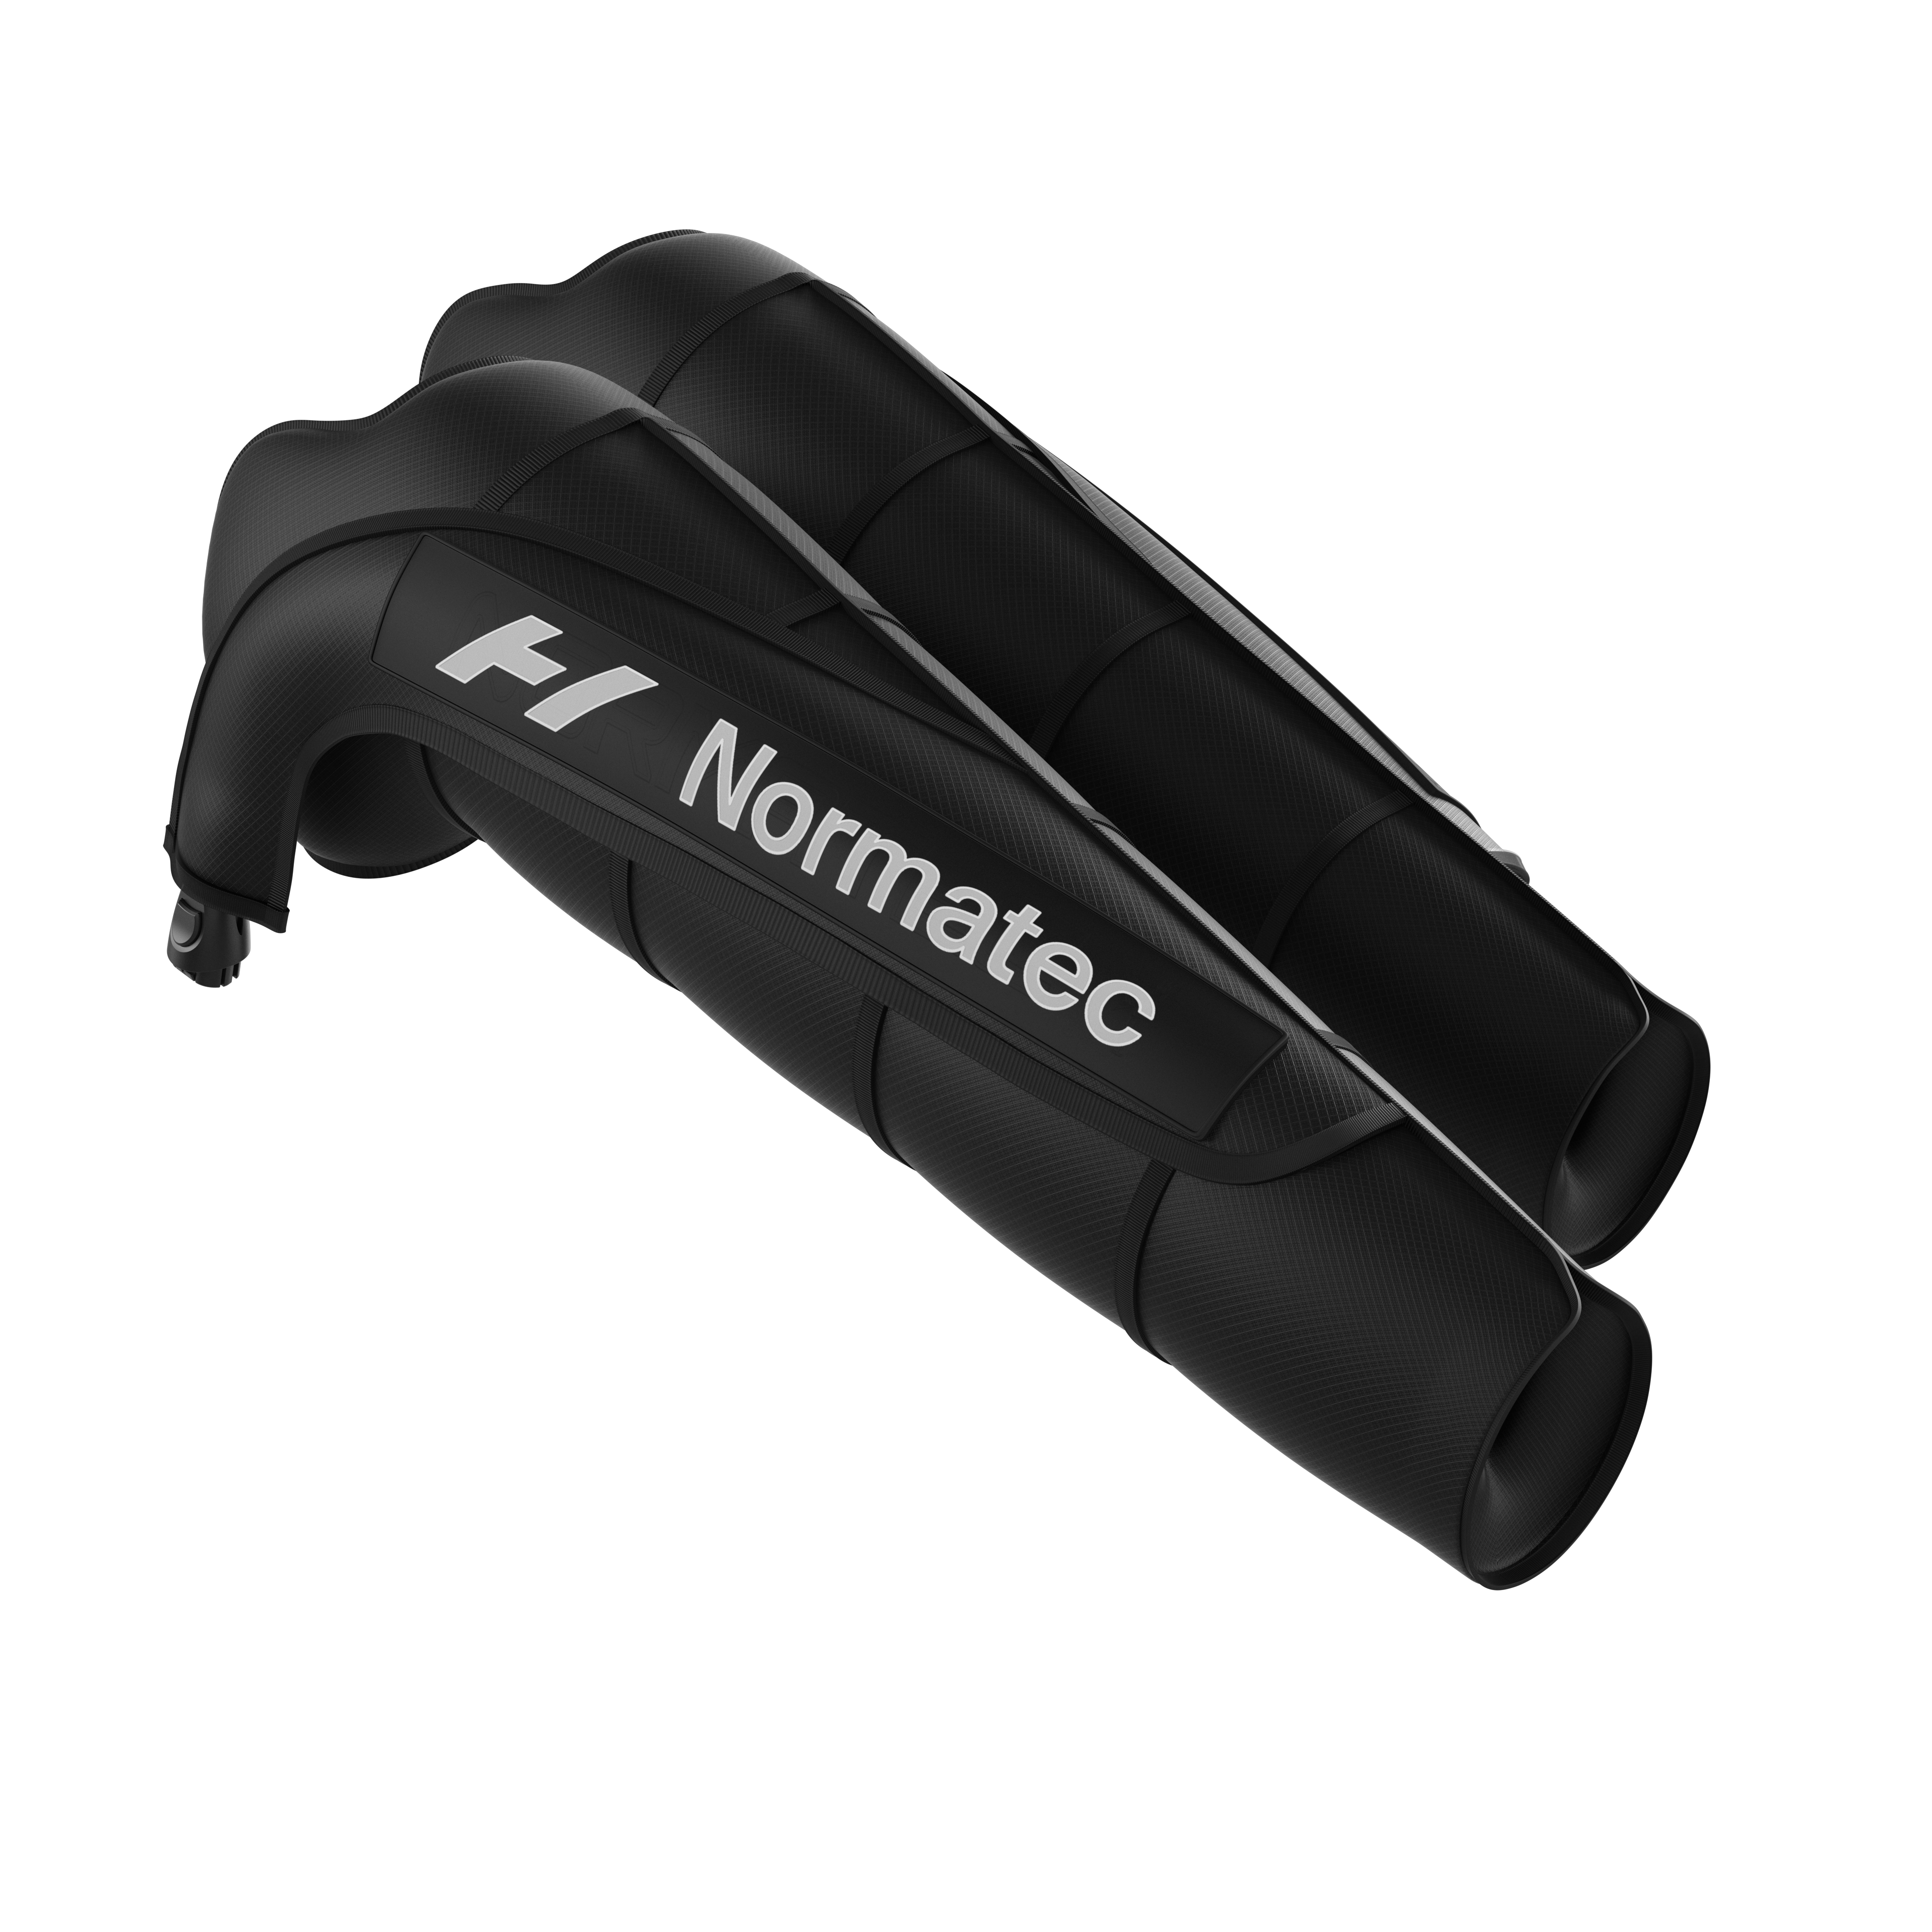 Hyperice Normatec 3 Arm Attachments